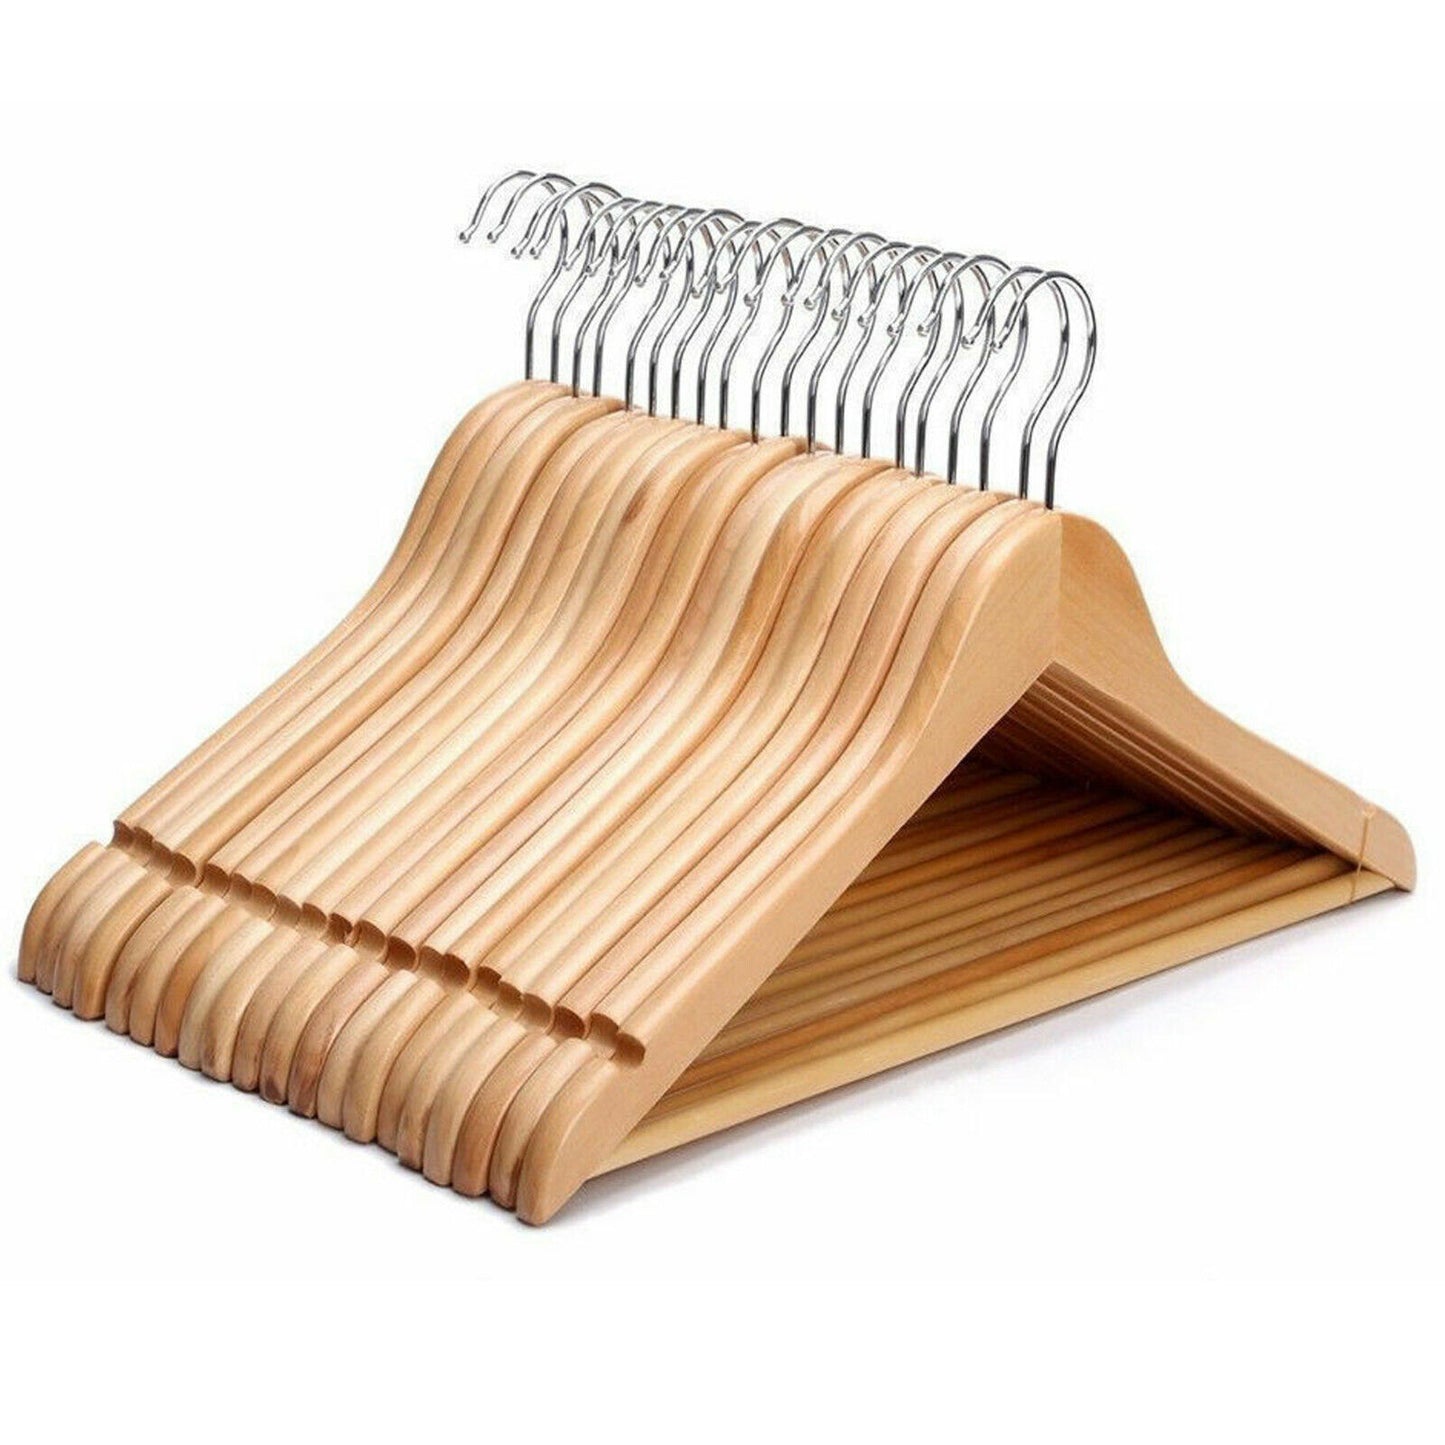 20 Natural Wooden Coat Hangers With Trouser Bar